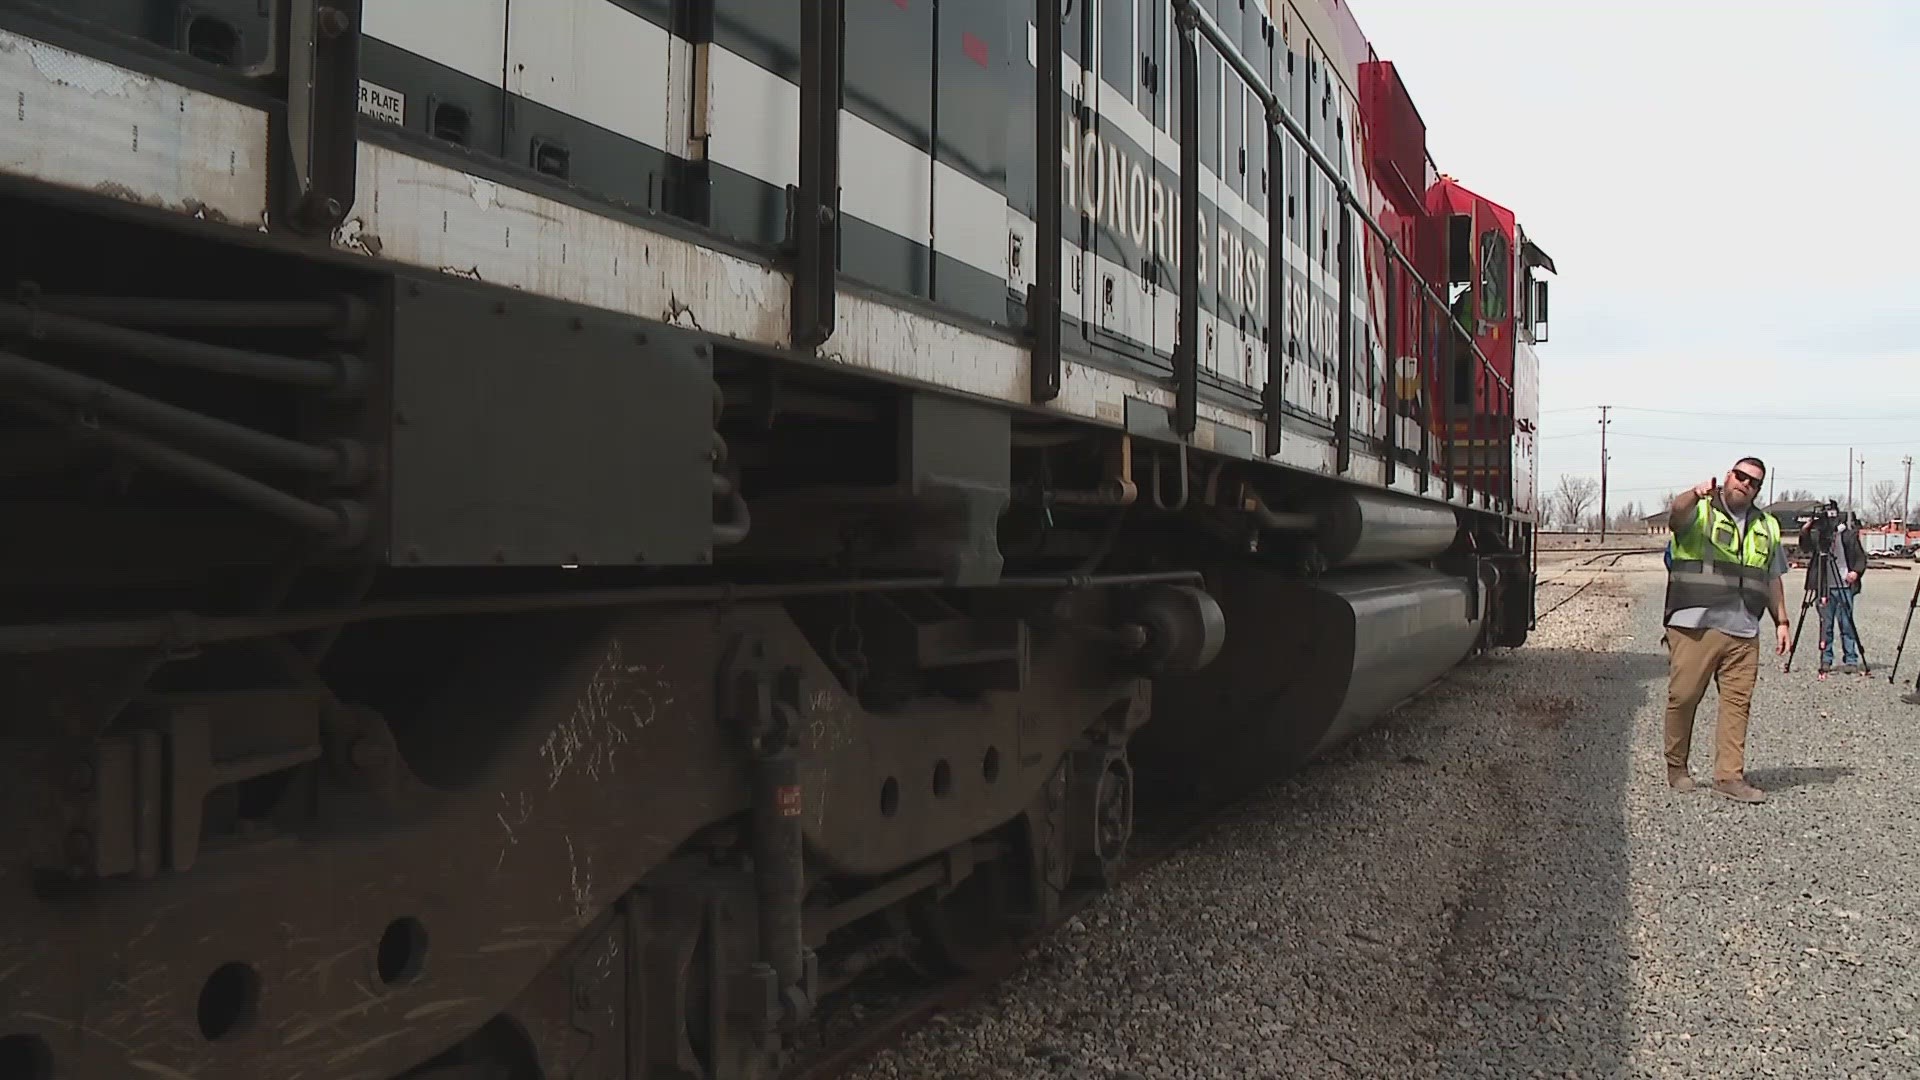 Norfolk Southern offered the first in a series of safety training sessions Tuesday for first responders across Ohio and beyond.